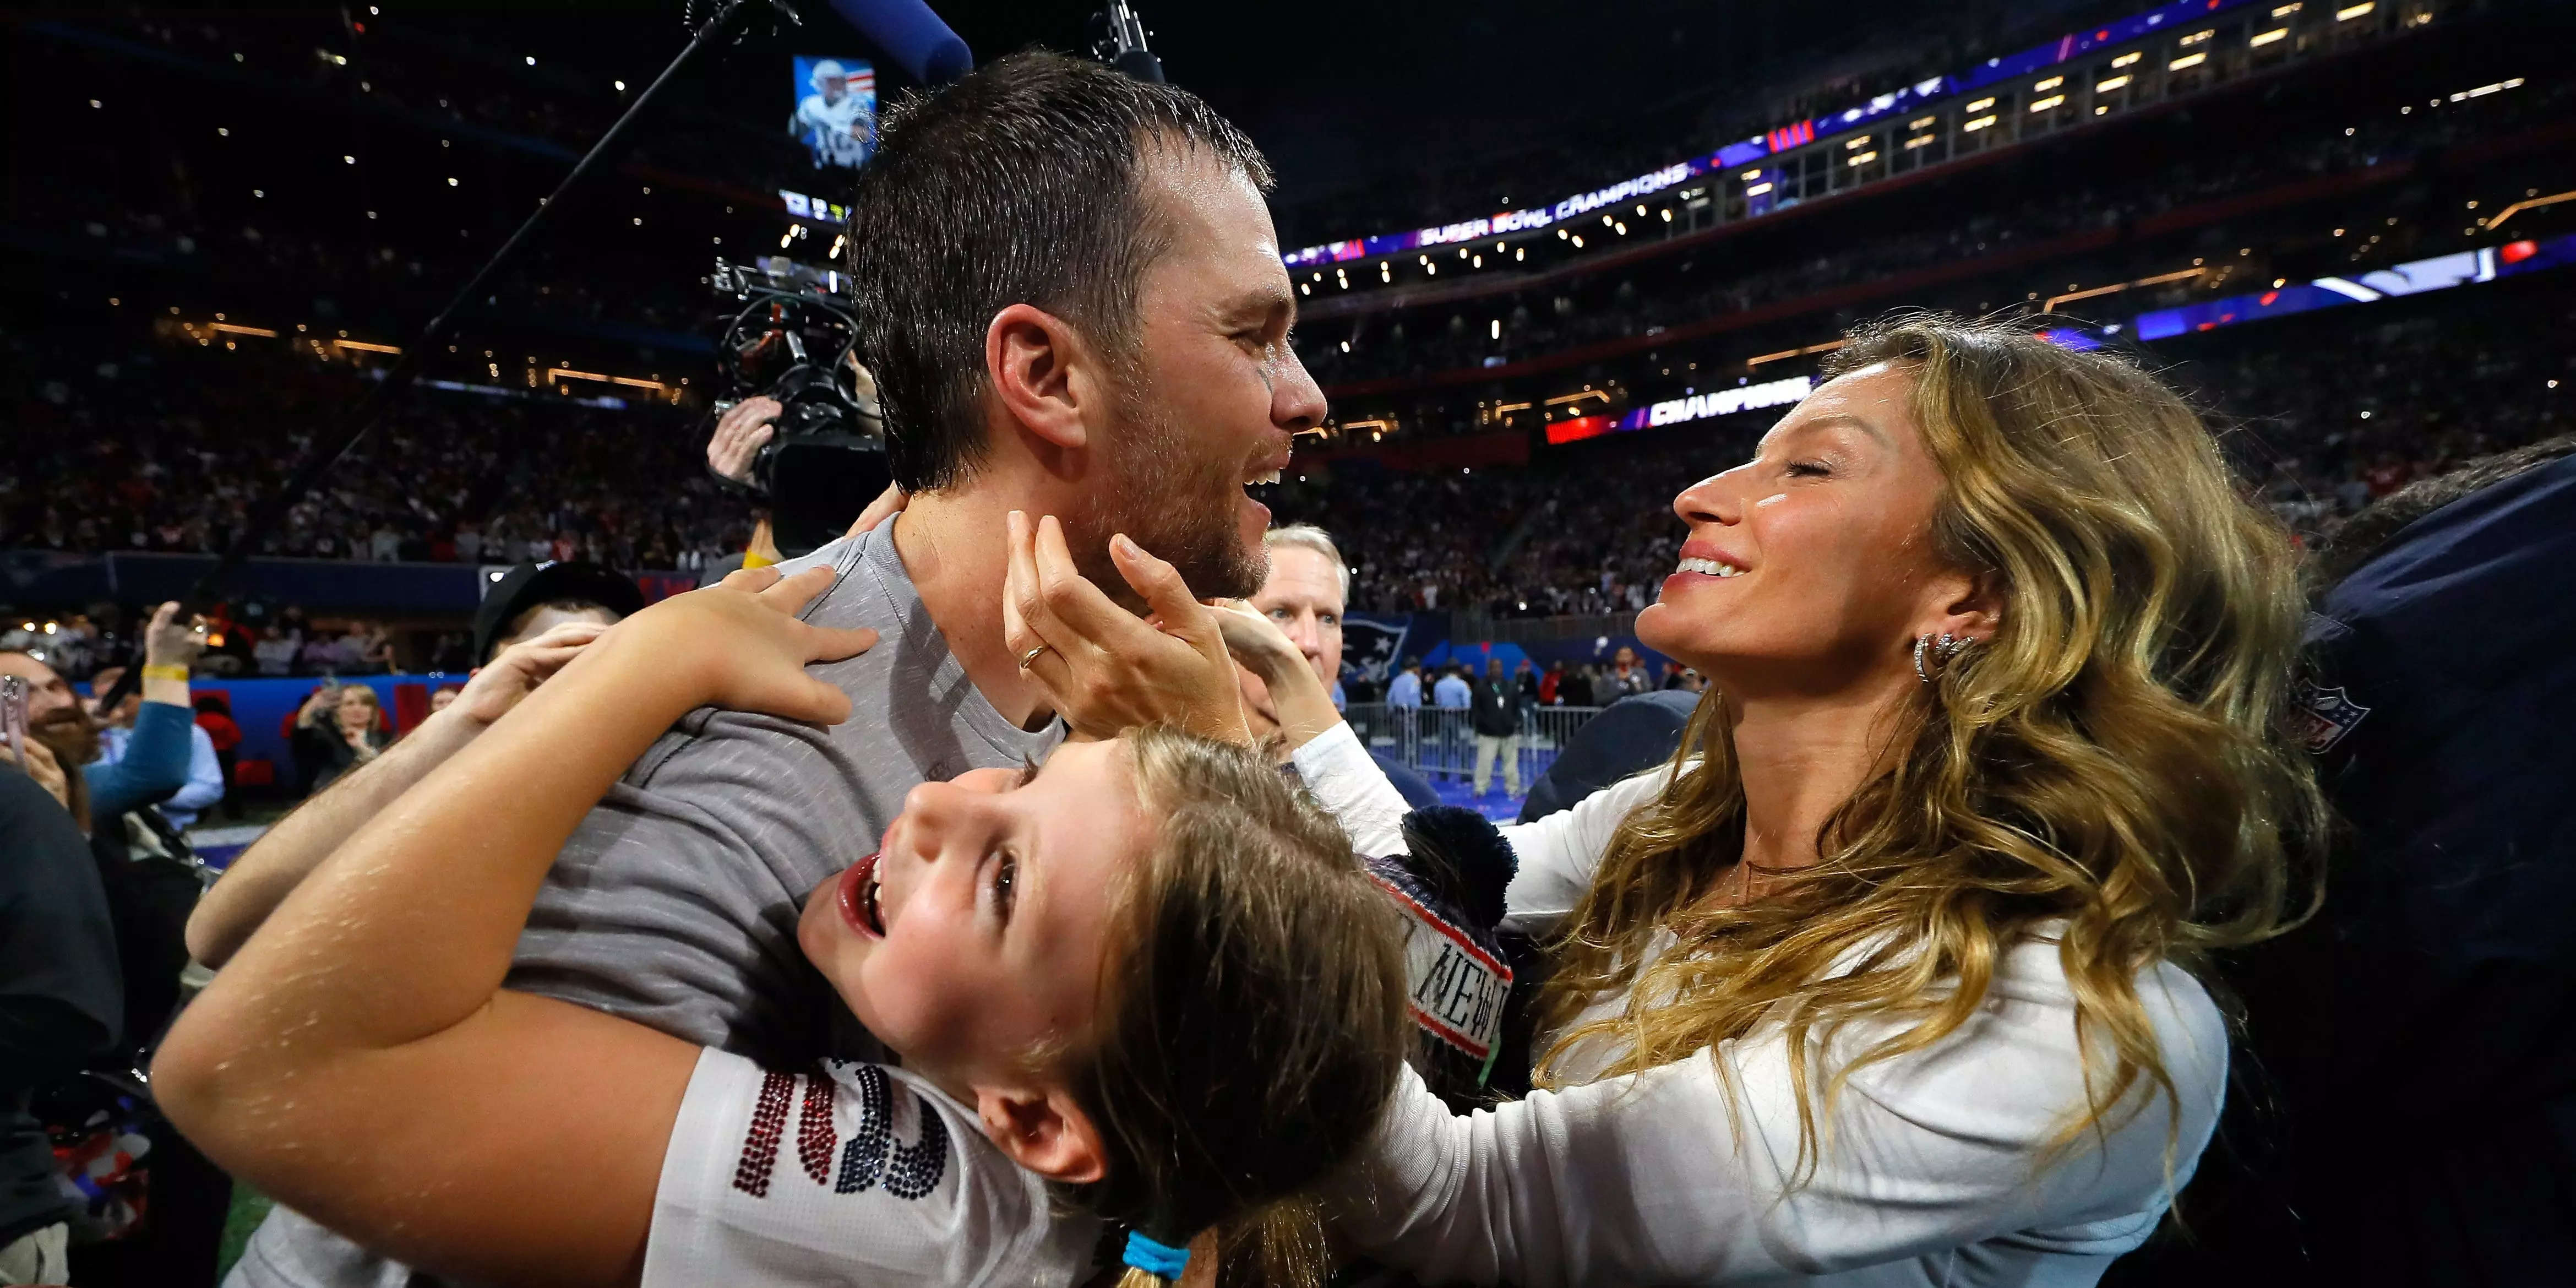 Tom Brady And Gisele Bündchen Are Facing Marital Issues And Living Separately Report 4263